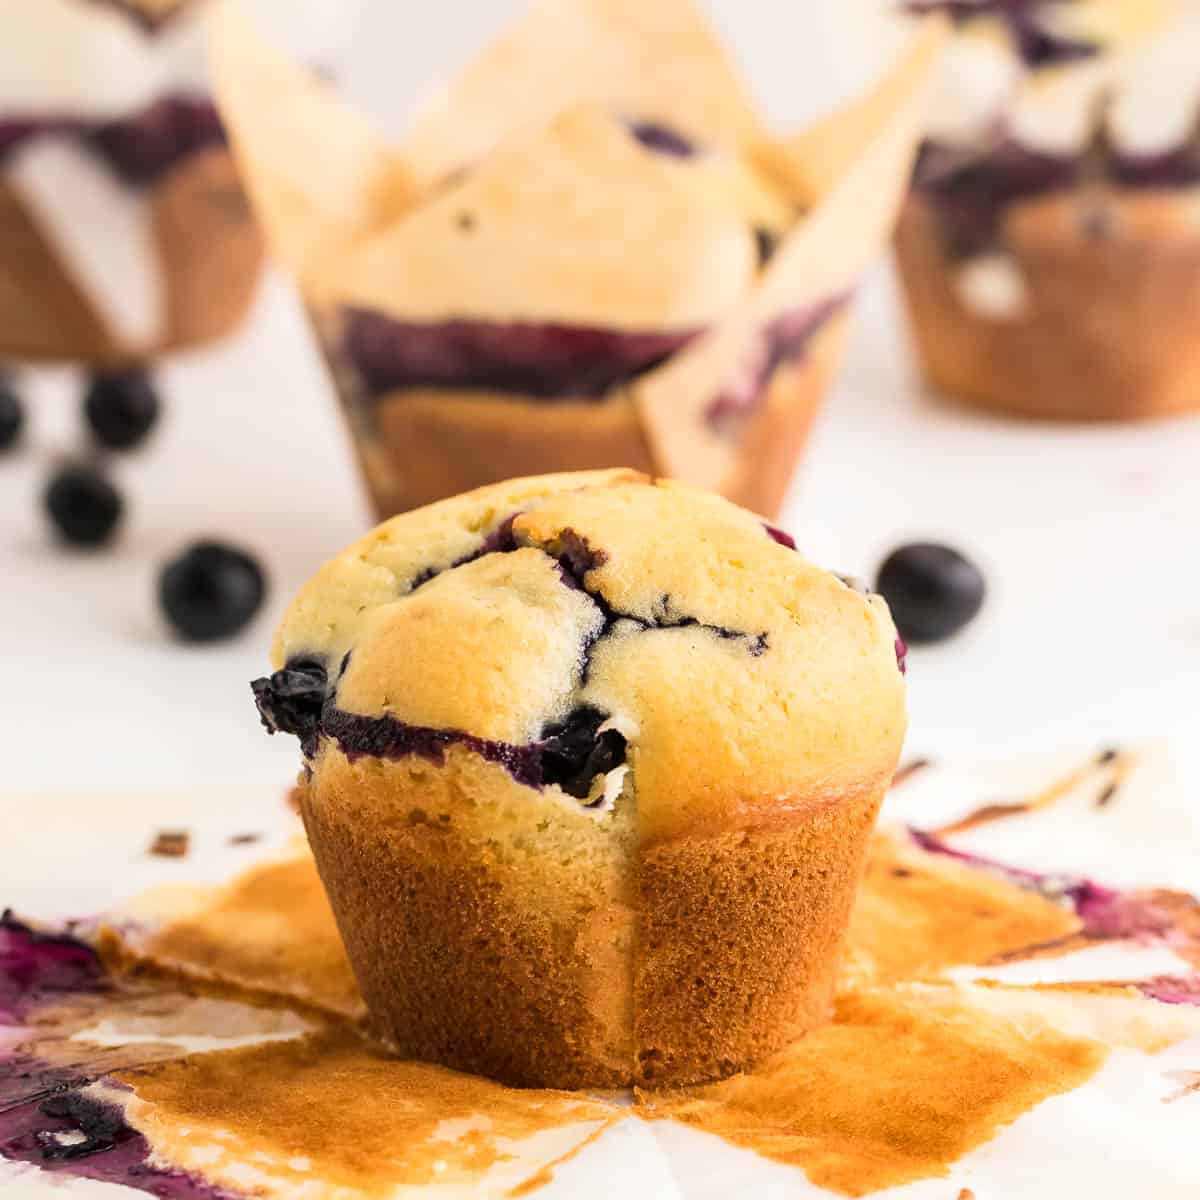 A closeup image of a freshly baked blueberry muffin with the liner removed.